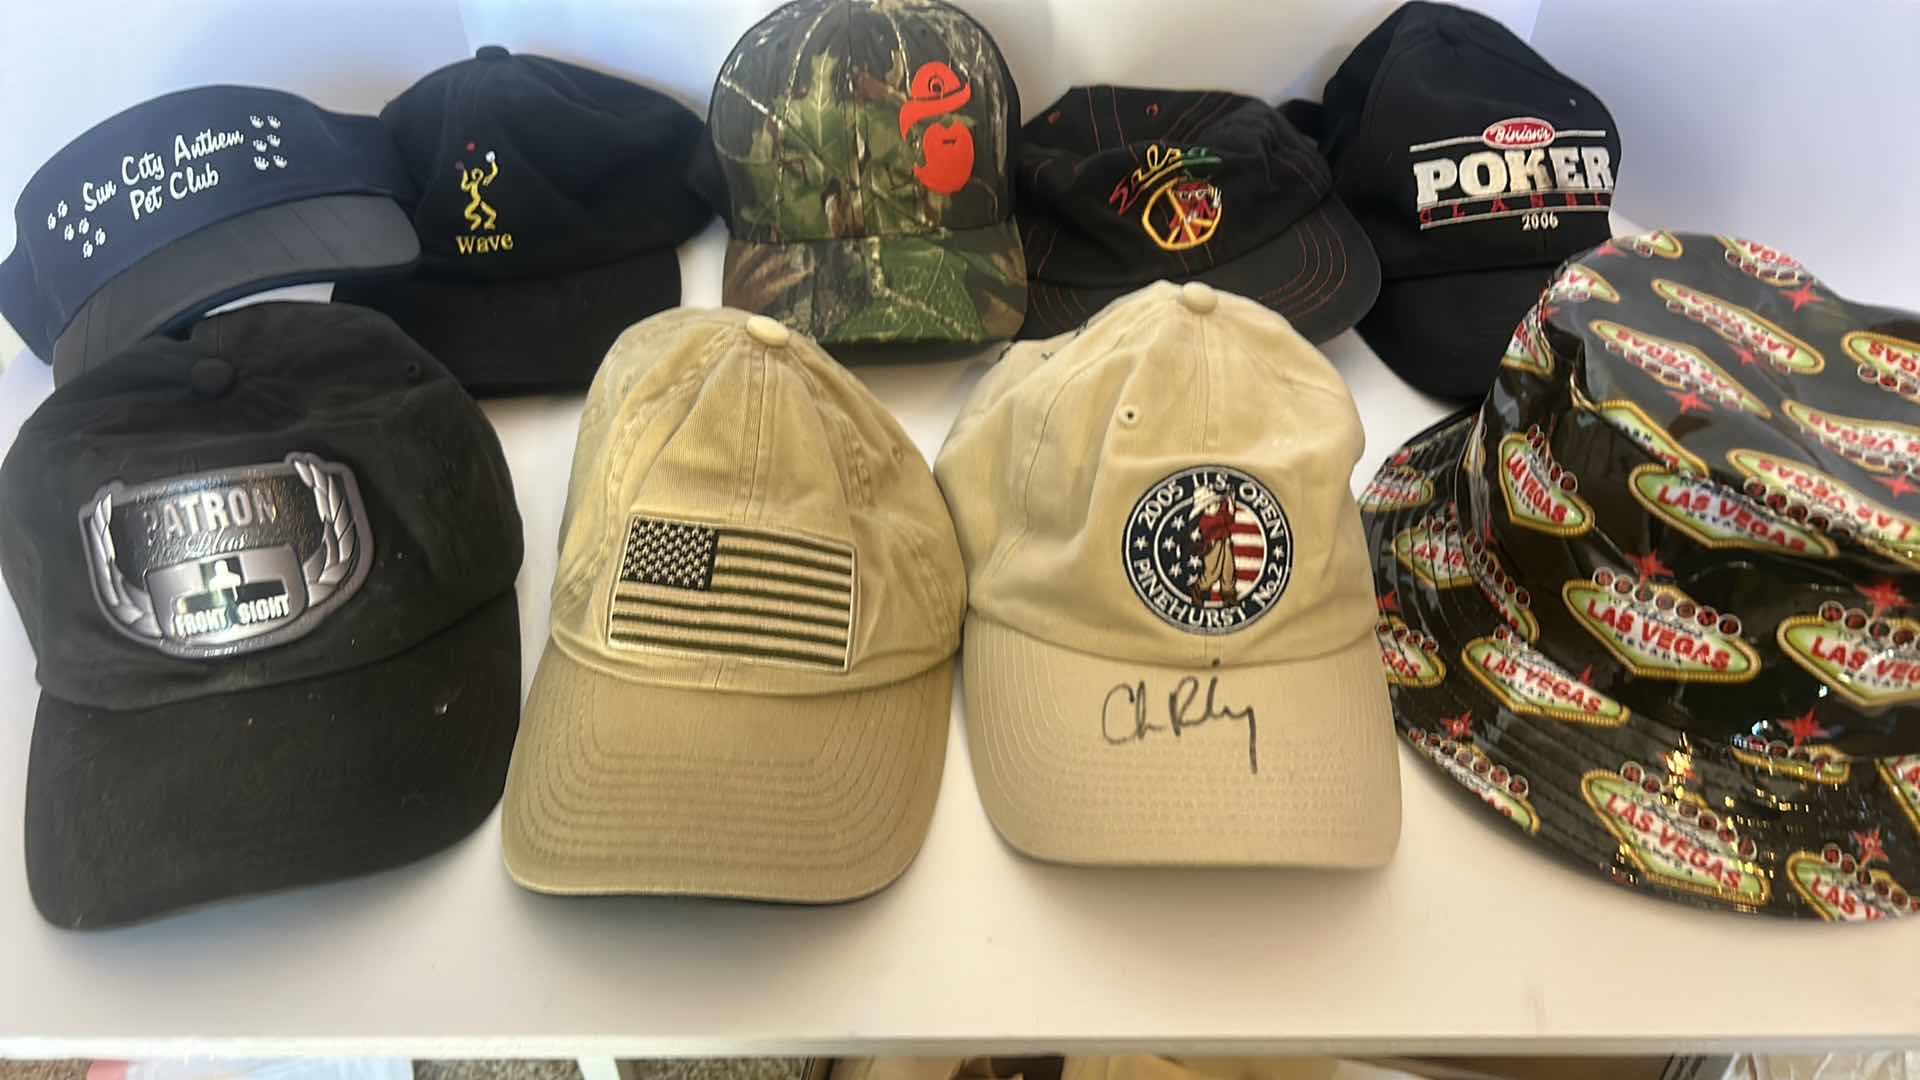 Photo 2 of 9 HATS - SIGNED “CHRIS RILEY” US OPEN